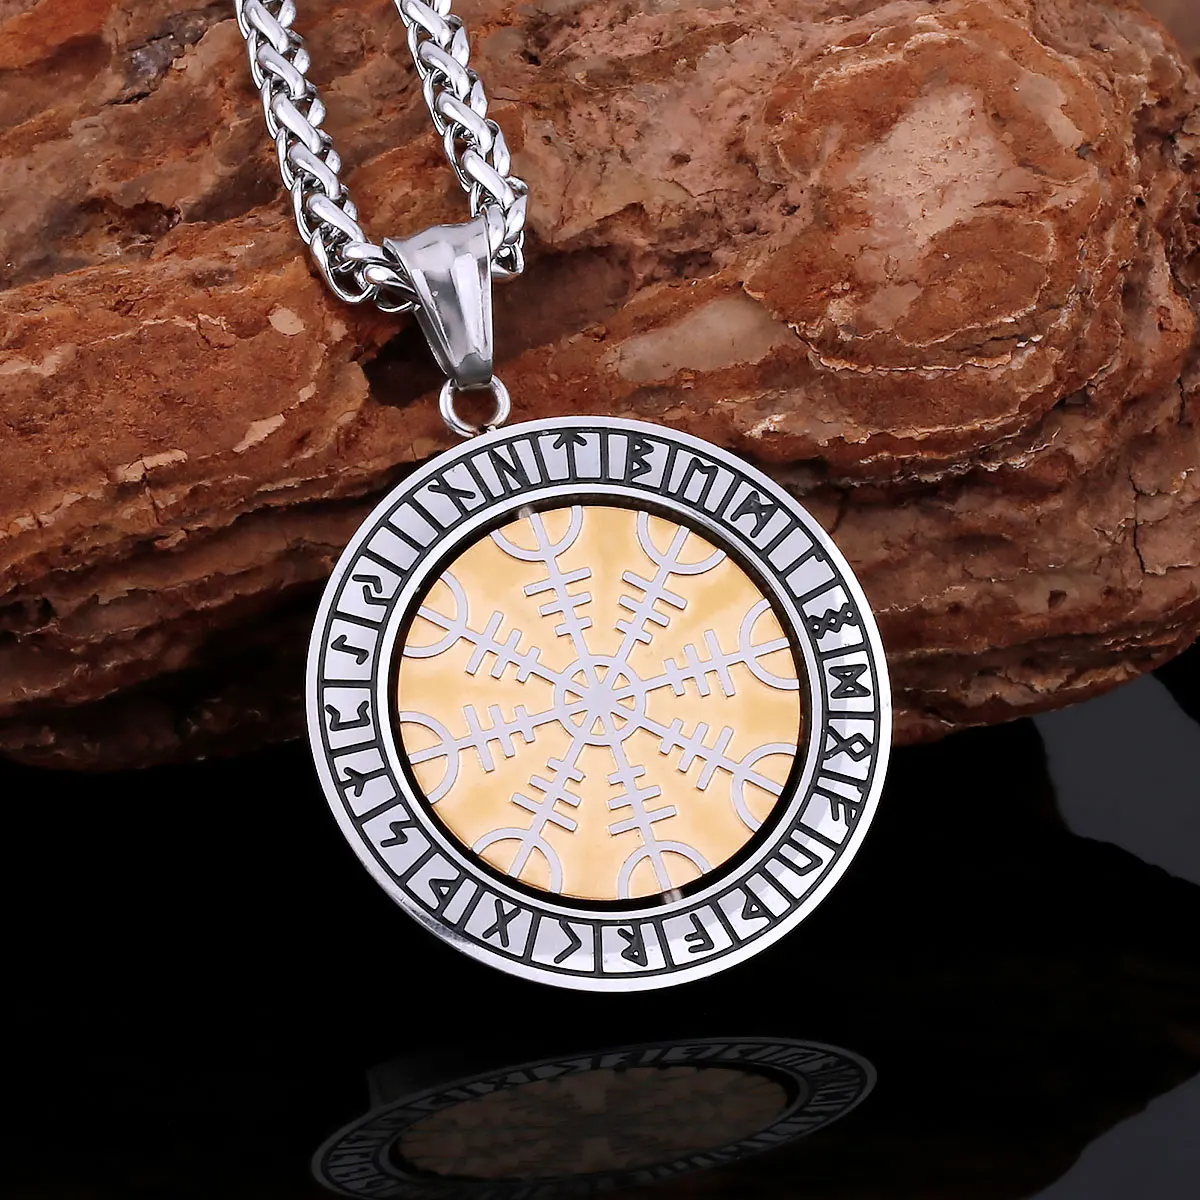 

Men's Vintage Viking Rotating Odin Compass Necklace Nordic Stainless Steel Rune Amulet Pendant Scandinavian Jewelry Gift